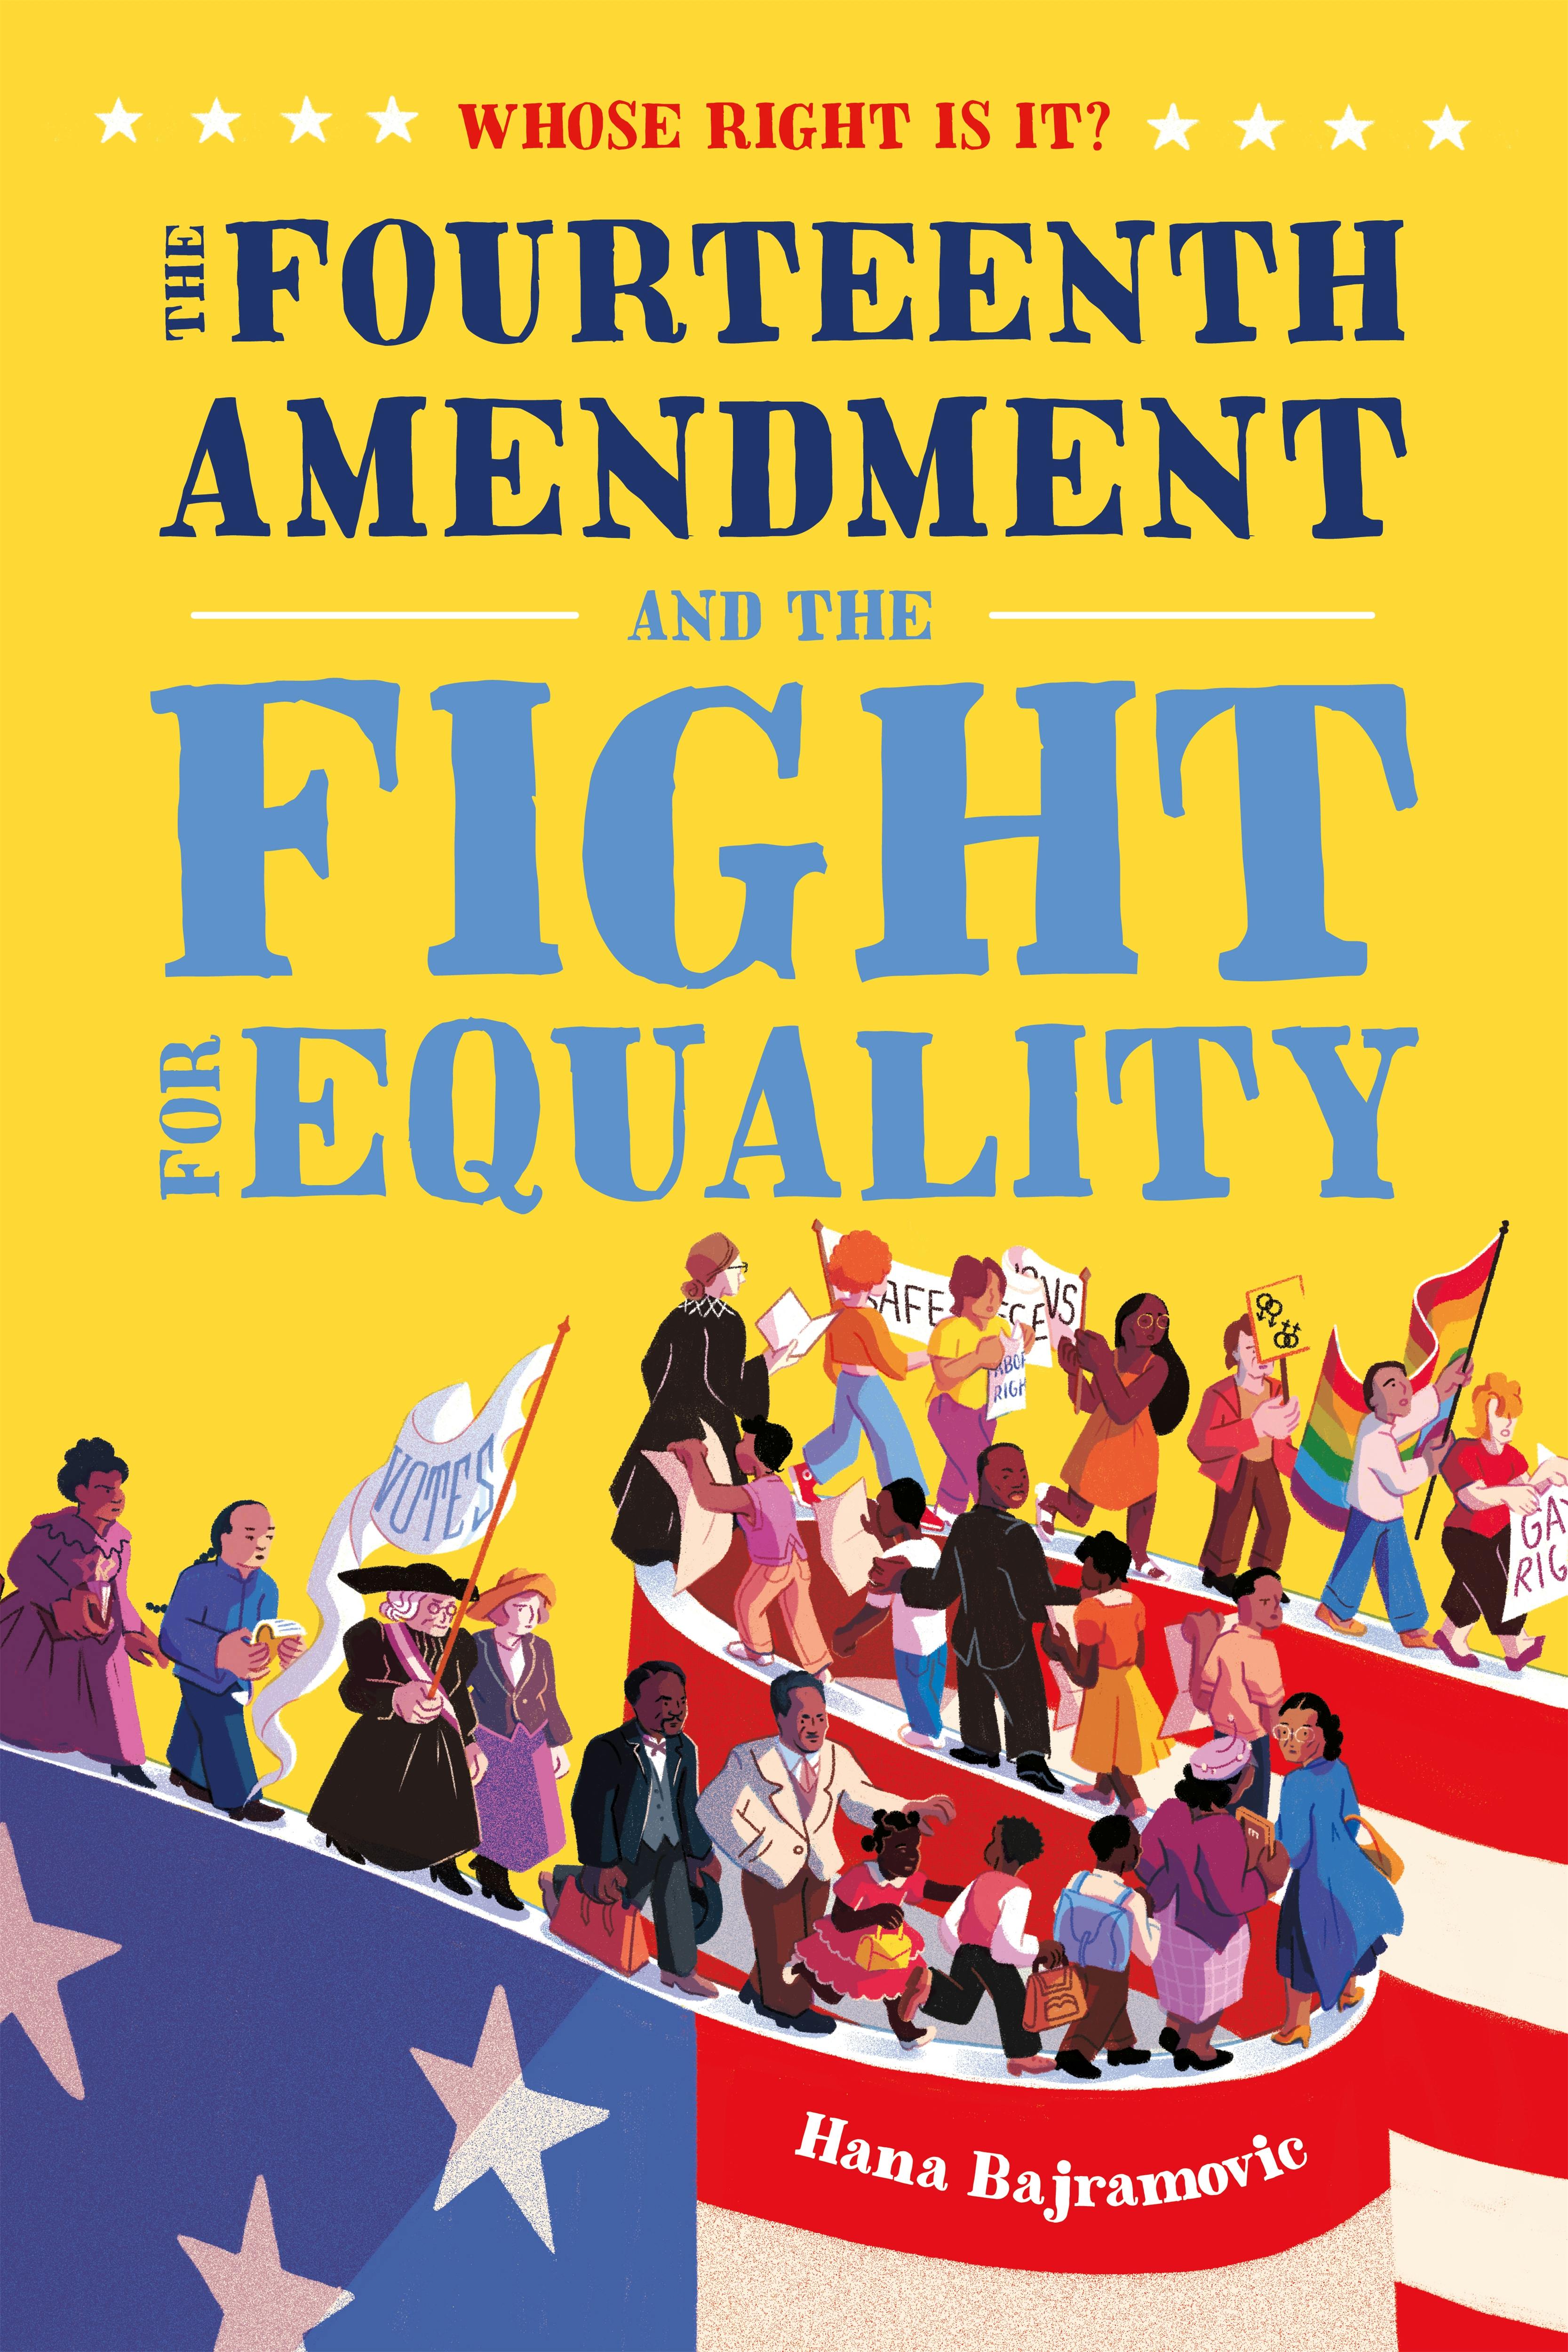 Image of Whose Right Is It? The Fourteenth Amendment and the Fight for Equality